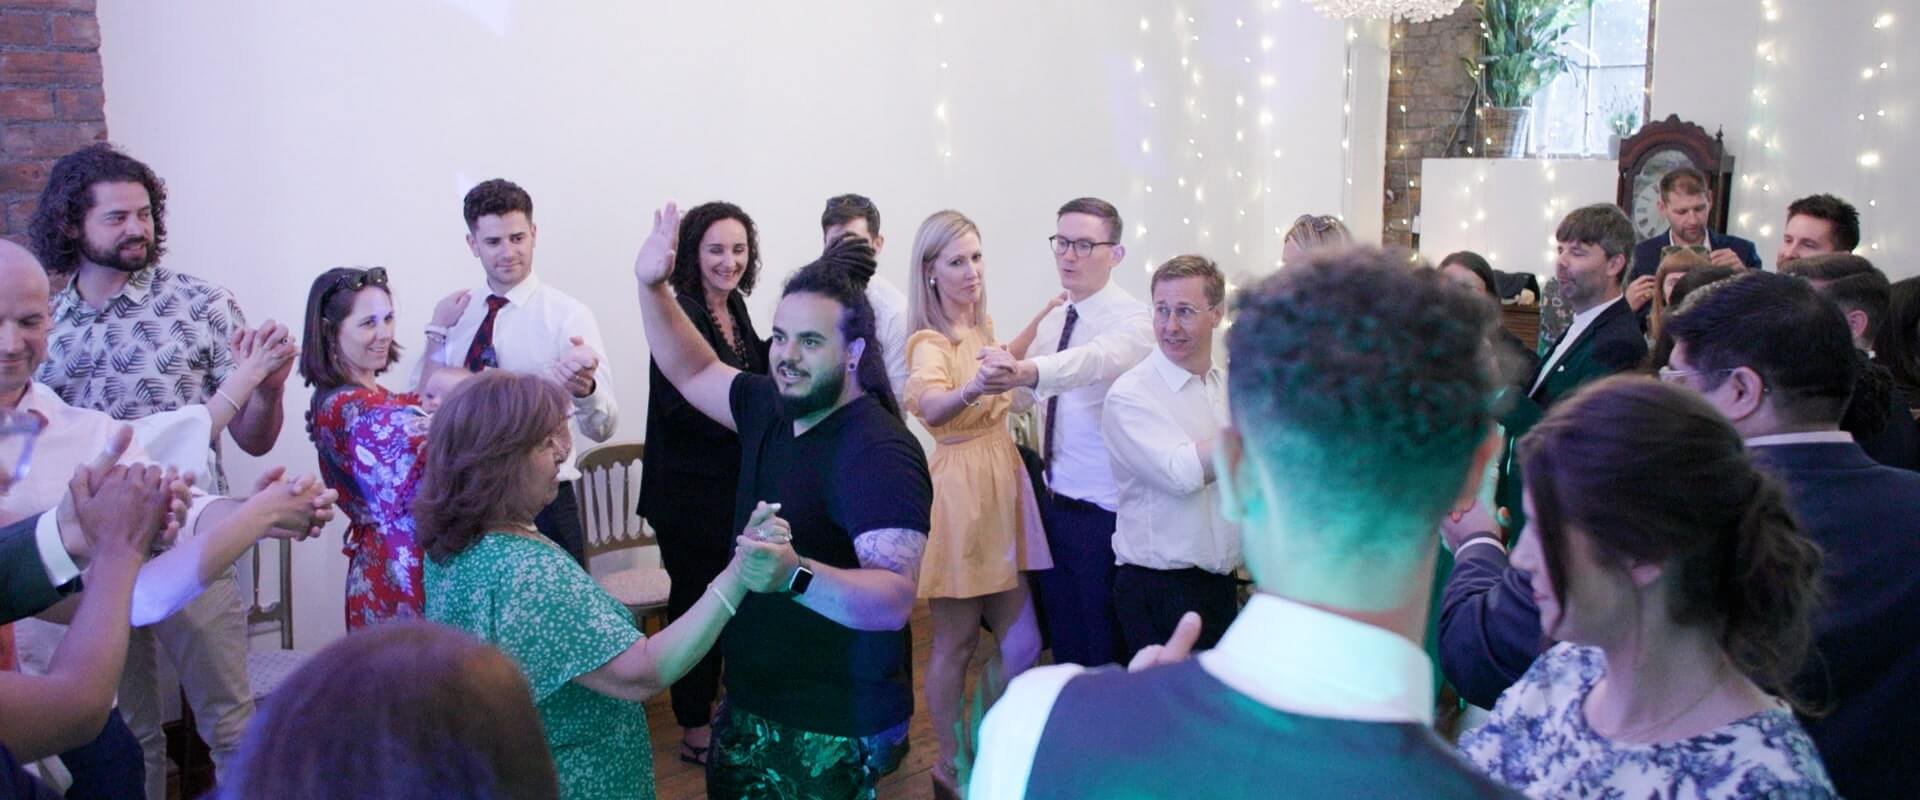 Salsa instructor teaching the wedding party how to perform the basic moves.